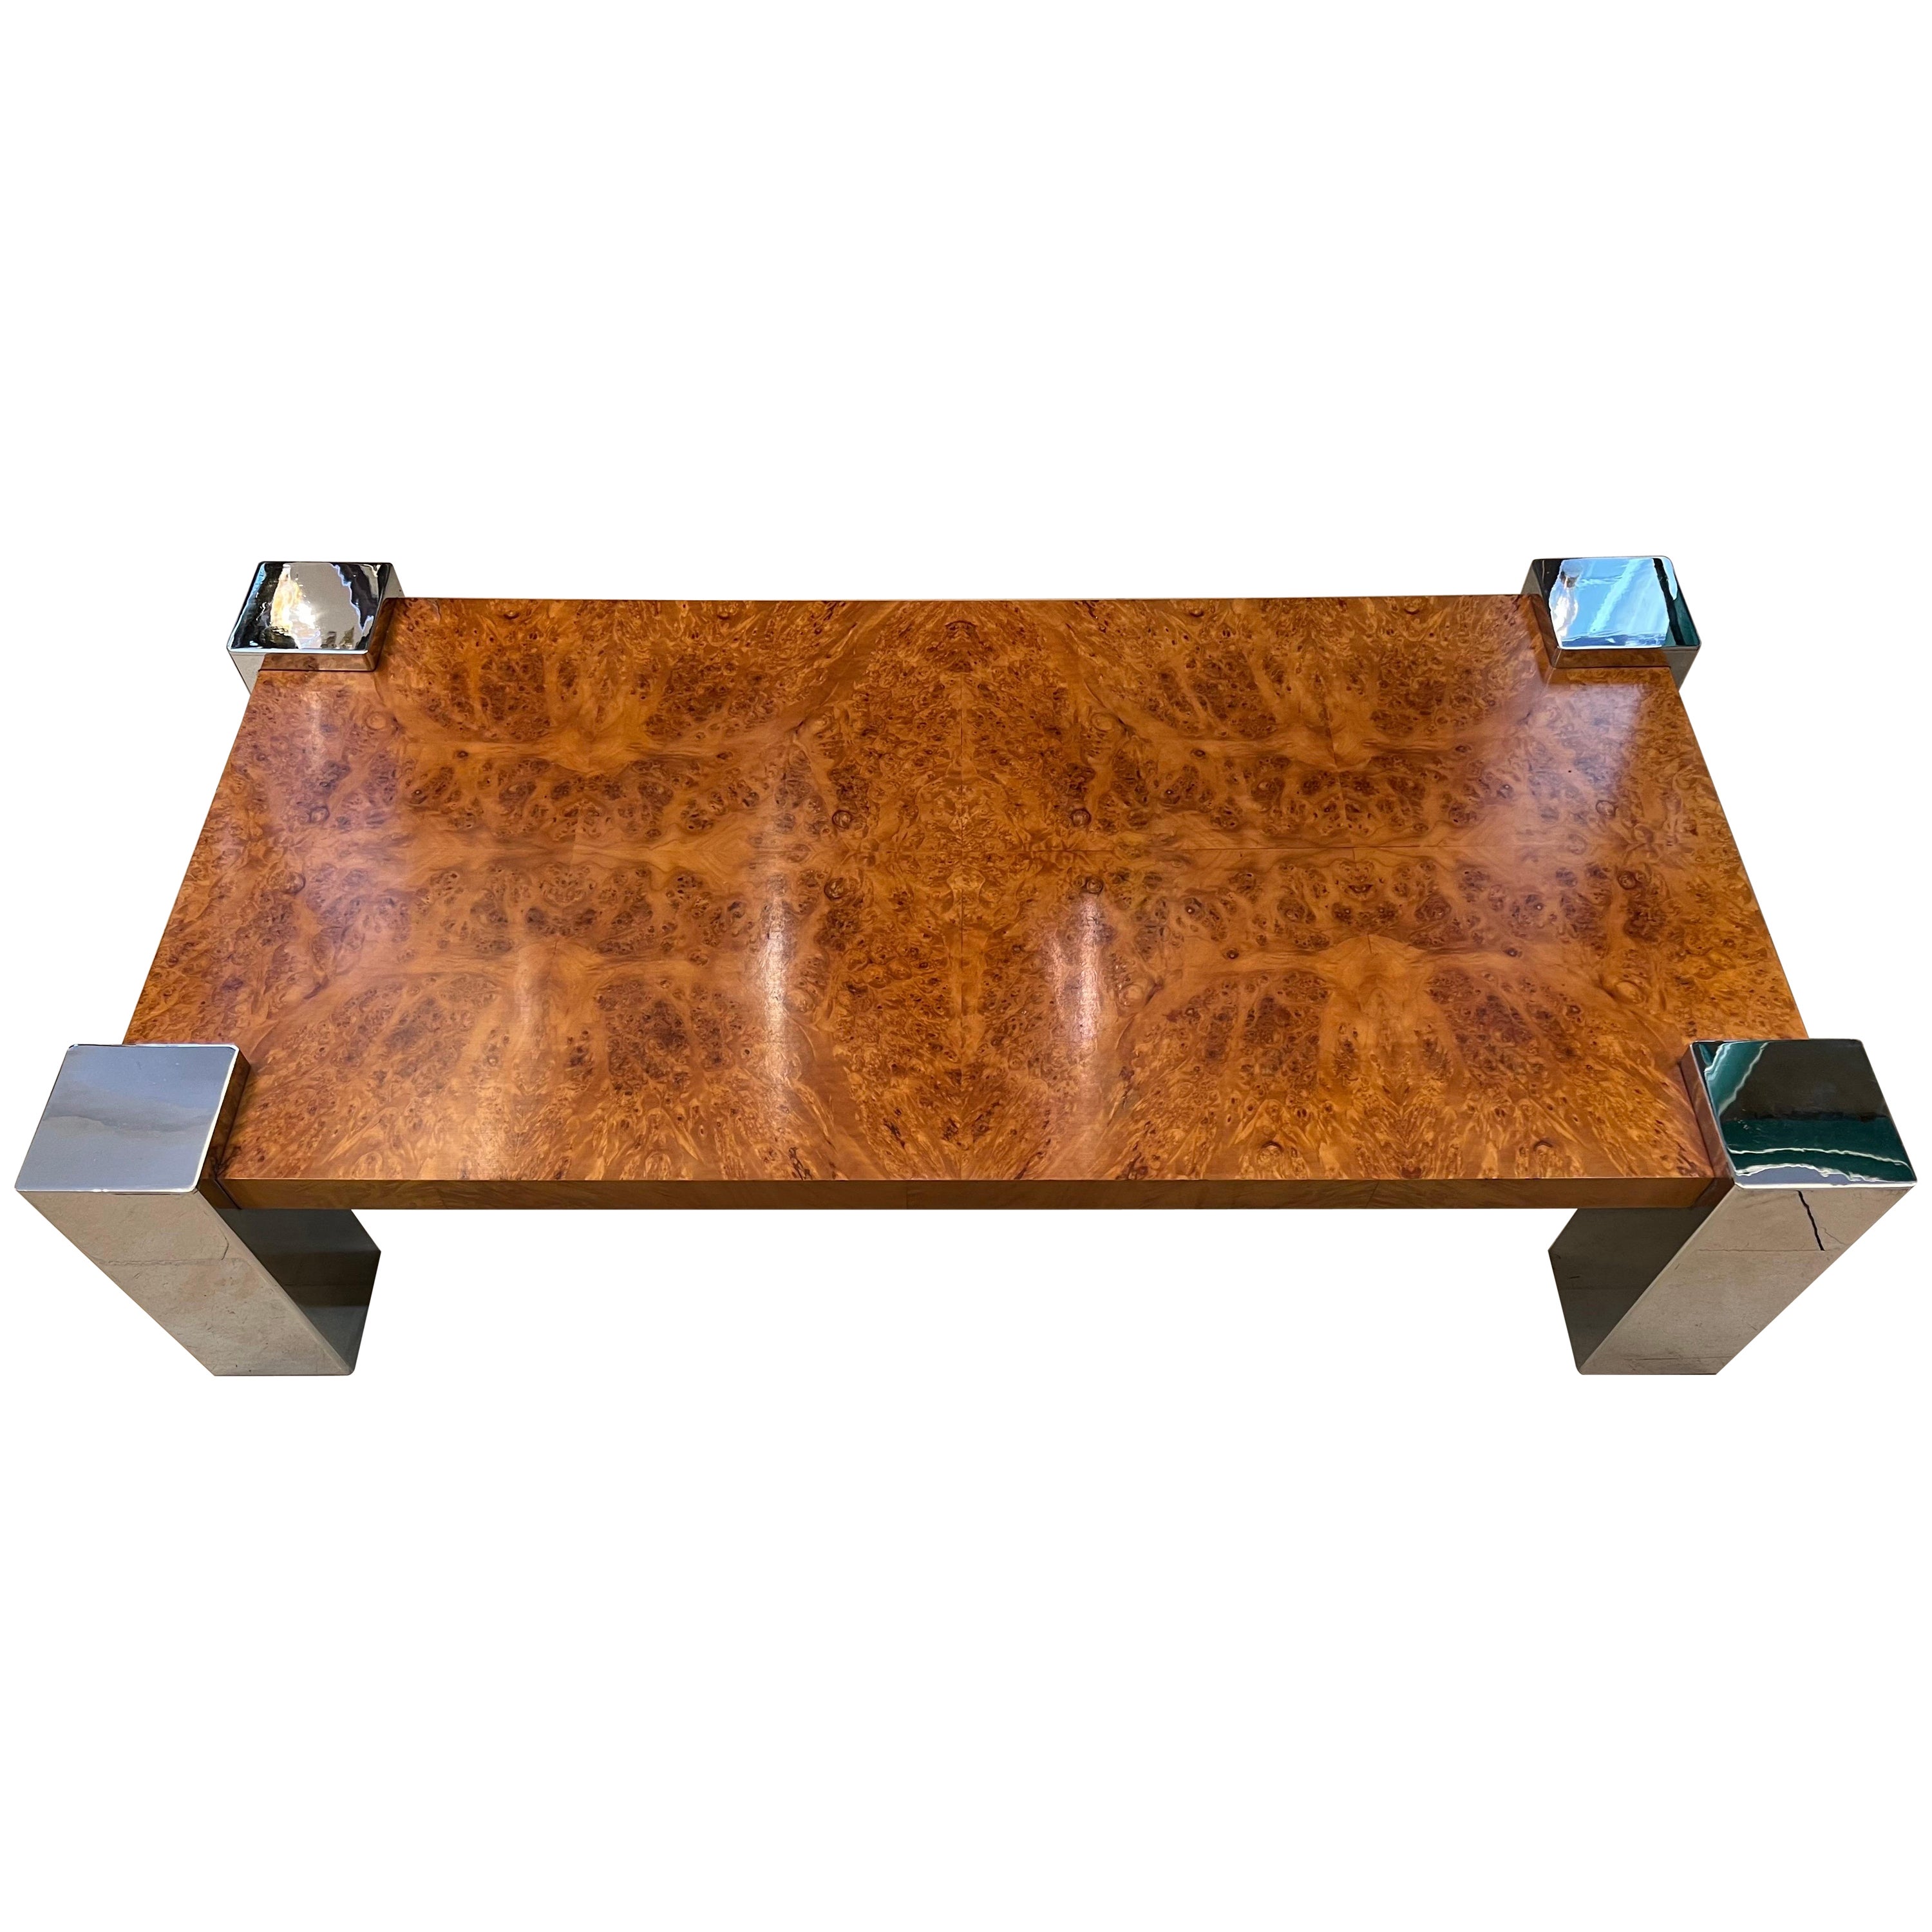 Italian Vintage Burr Walnut Coffee Table with Chromed Squared Legs, 1970s